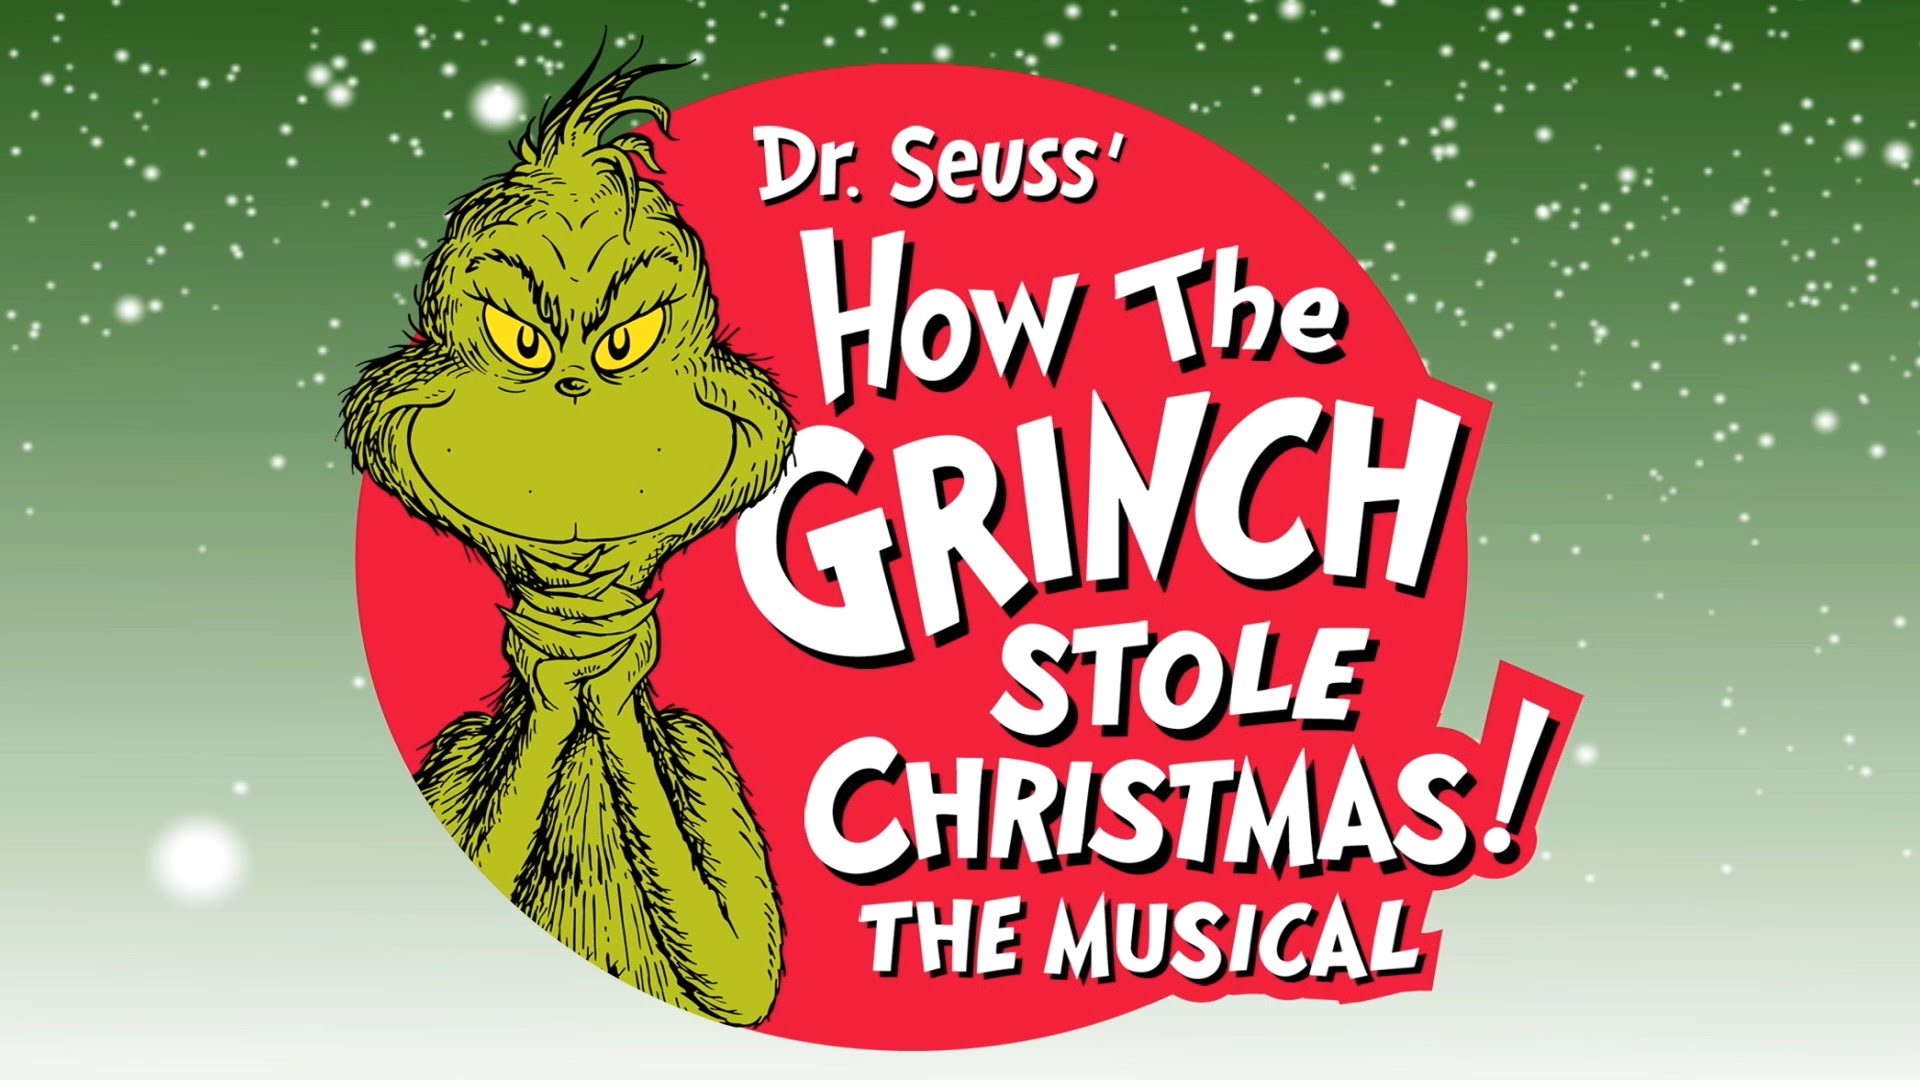 1920x1080 Here We Come A Carolling: Dr. Seuss' How The Grinch Stole Ch...